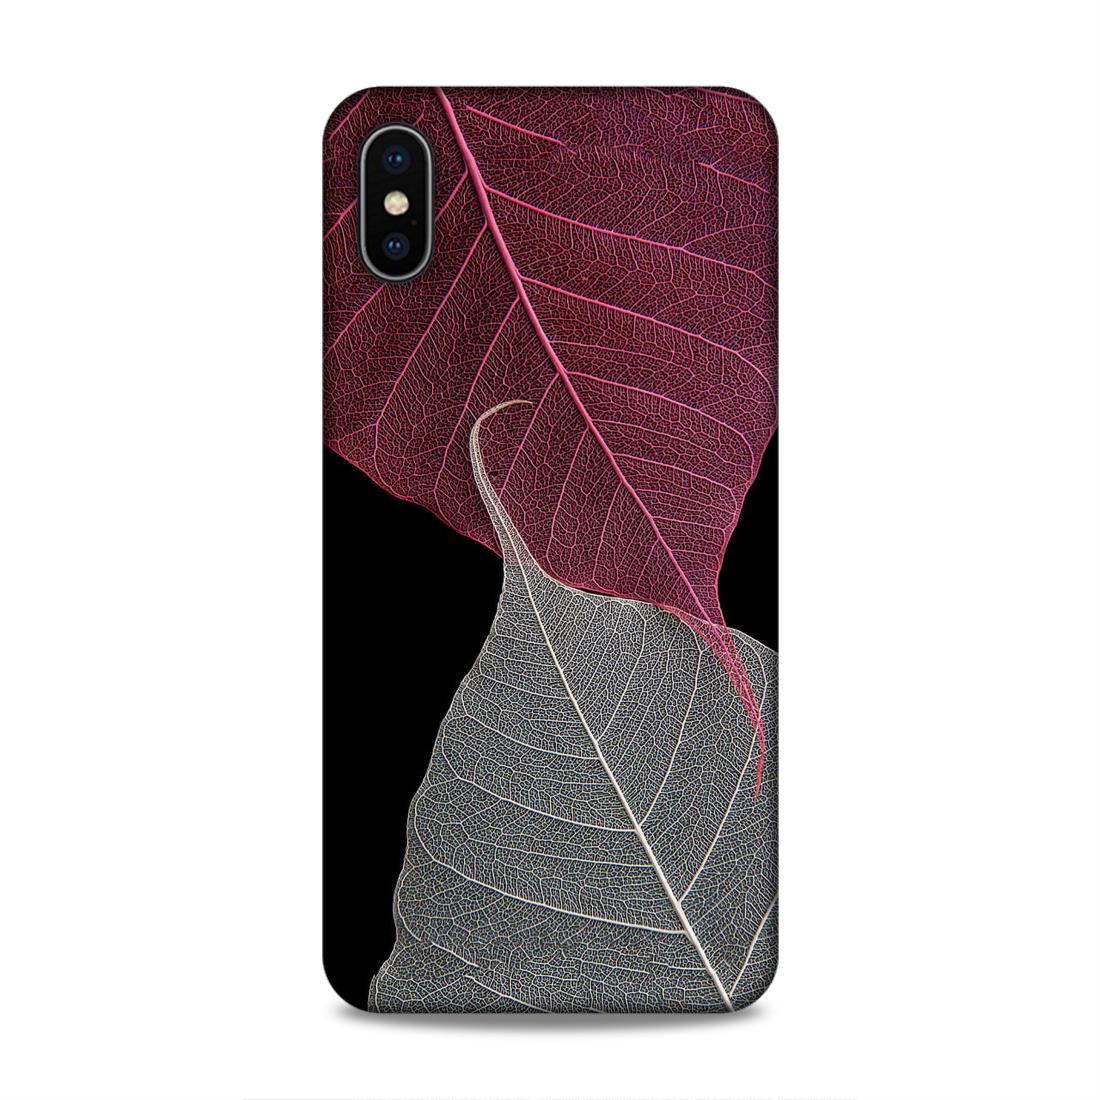 Two Leaf Hard Back Case For Apple iPhone XS Max